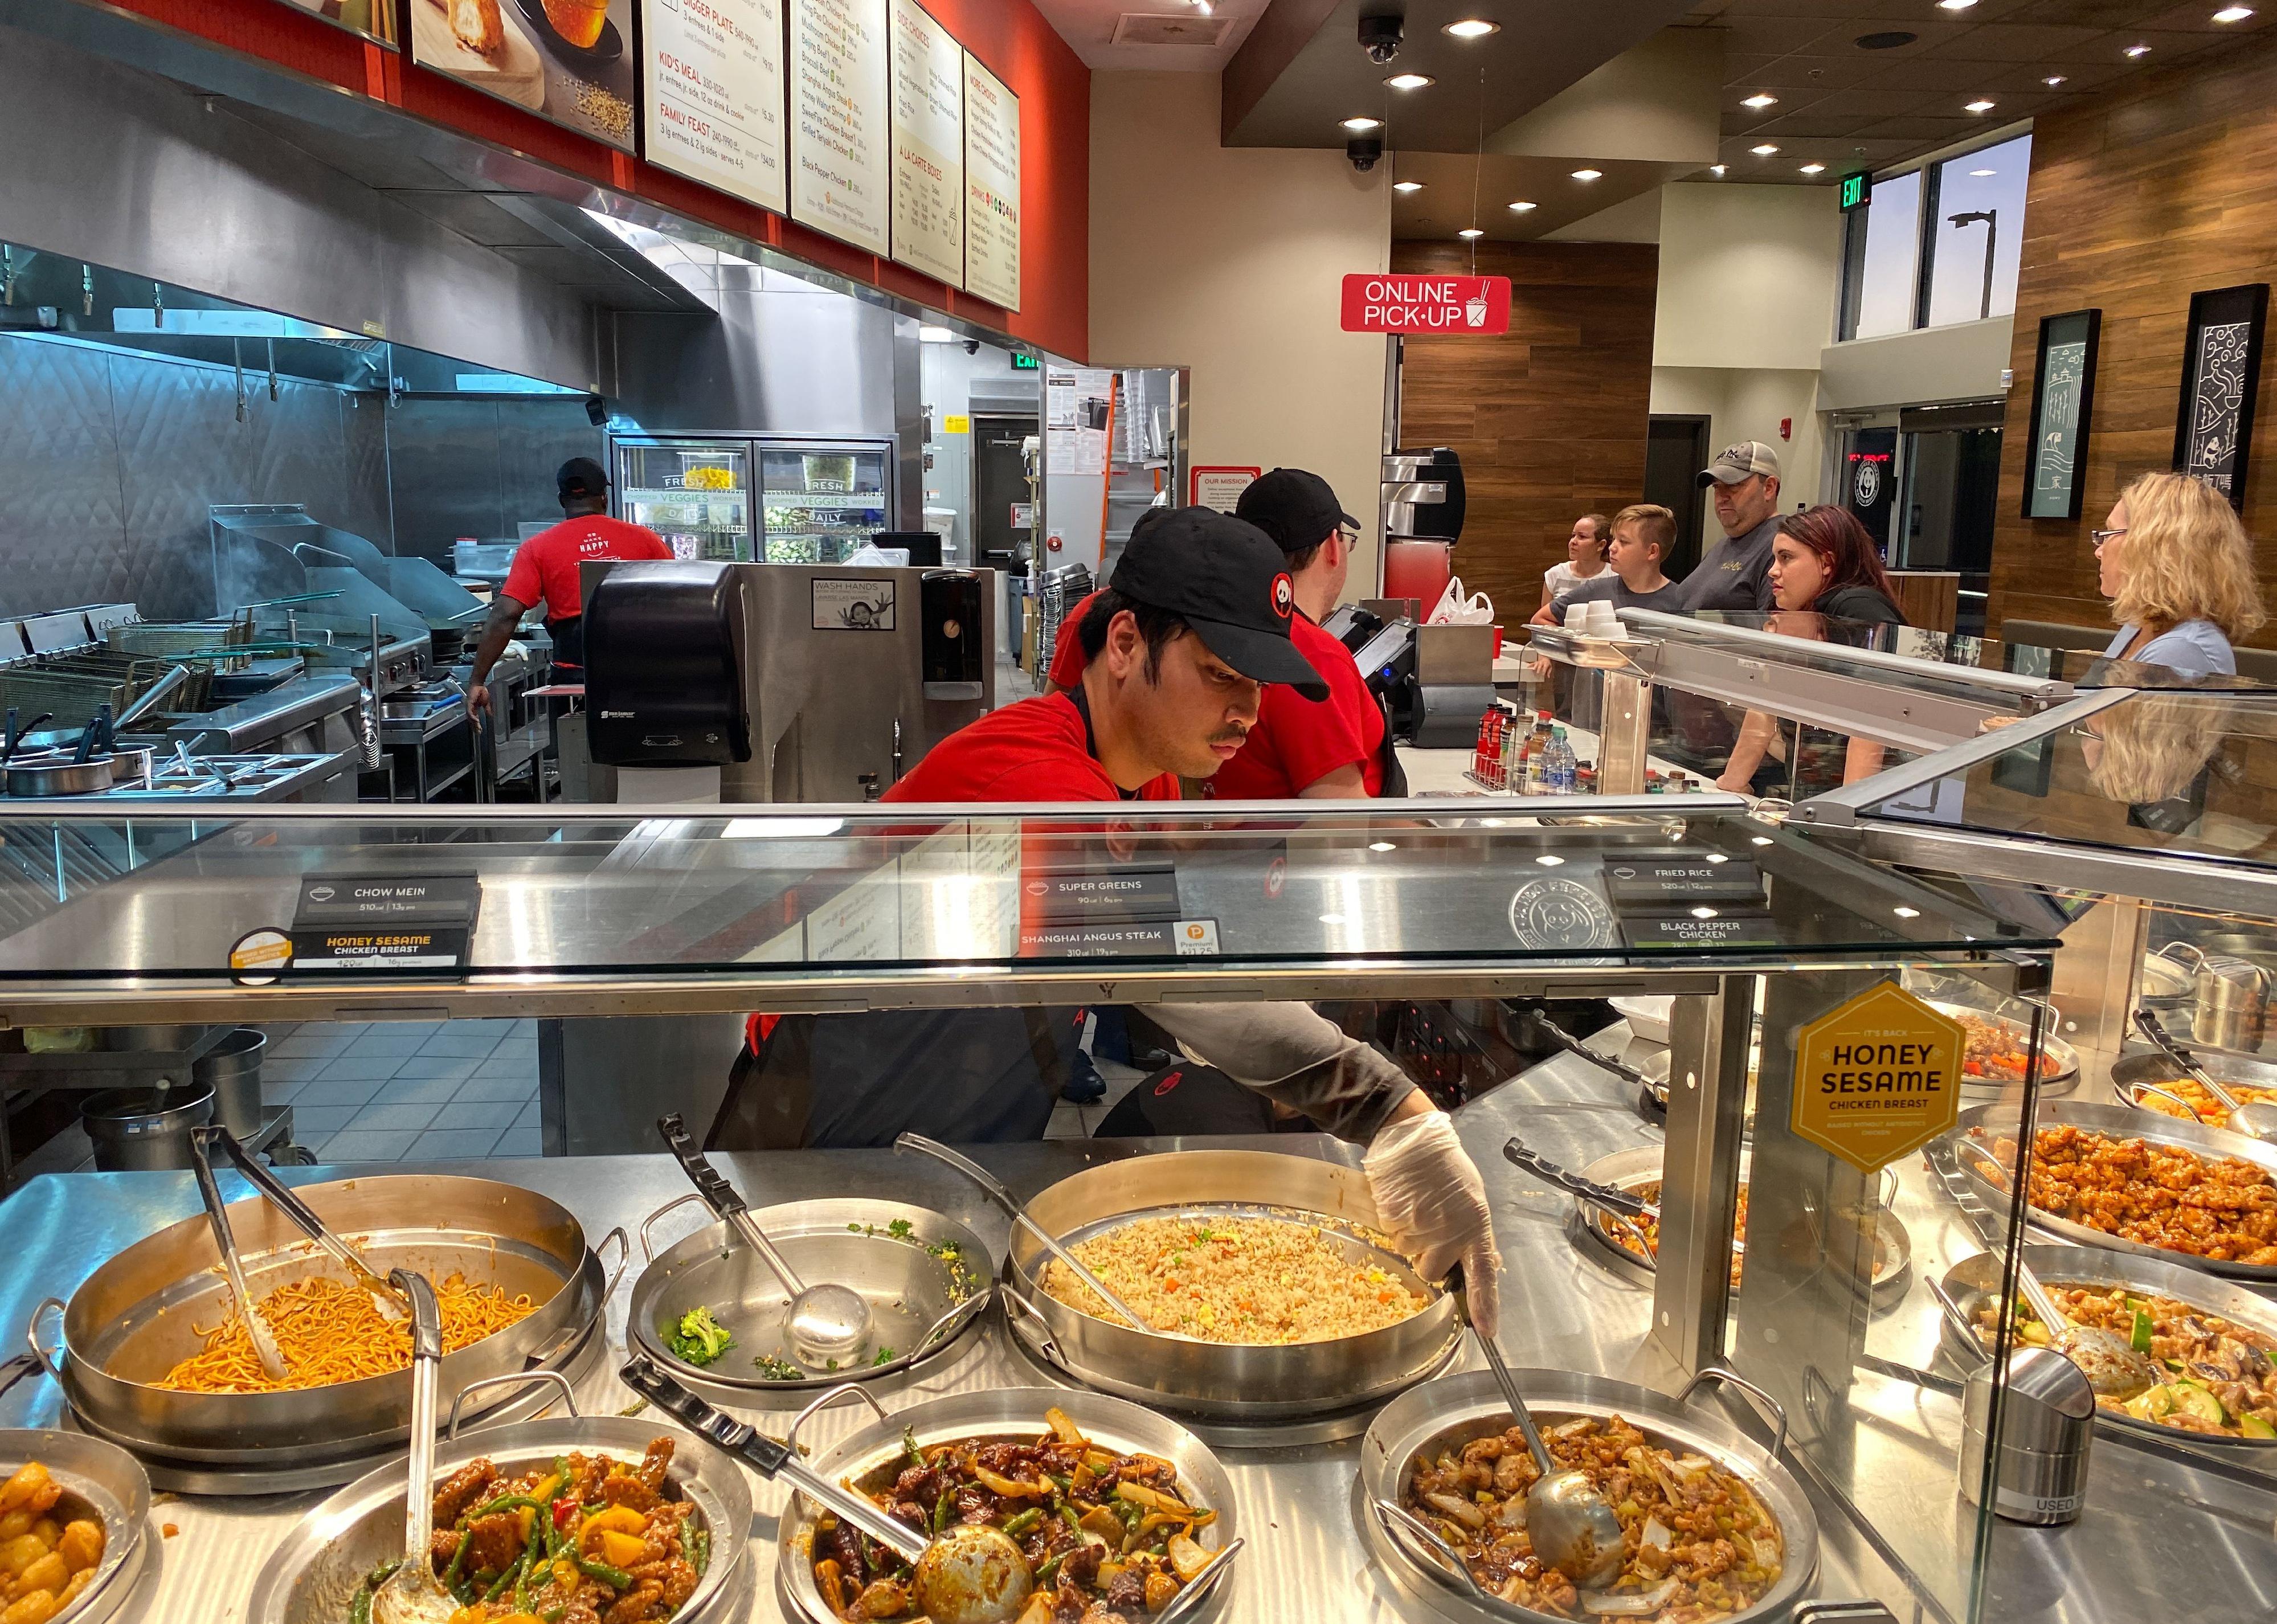 People standing in line ordering while Panda Express employees serve plates.